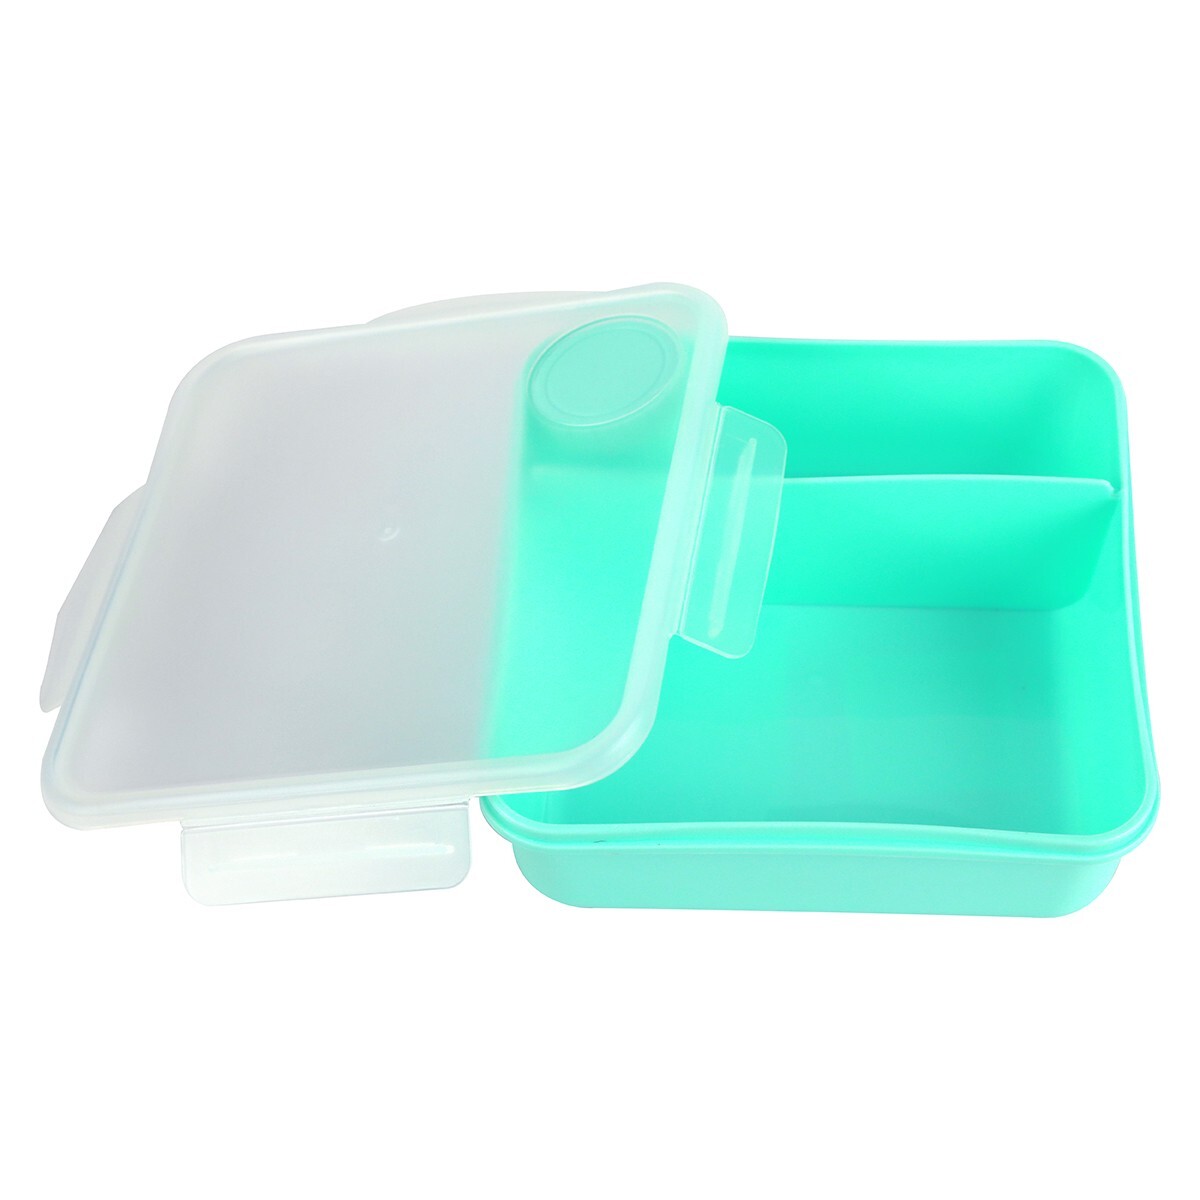 Lulu Bento Box With Dip Container 1450ml